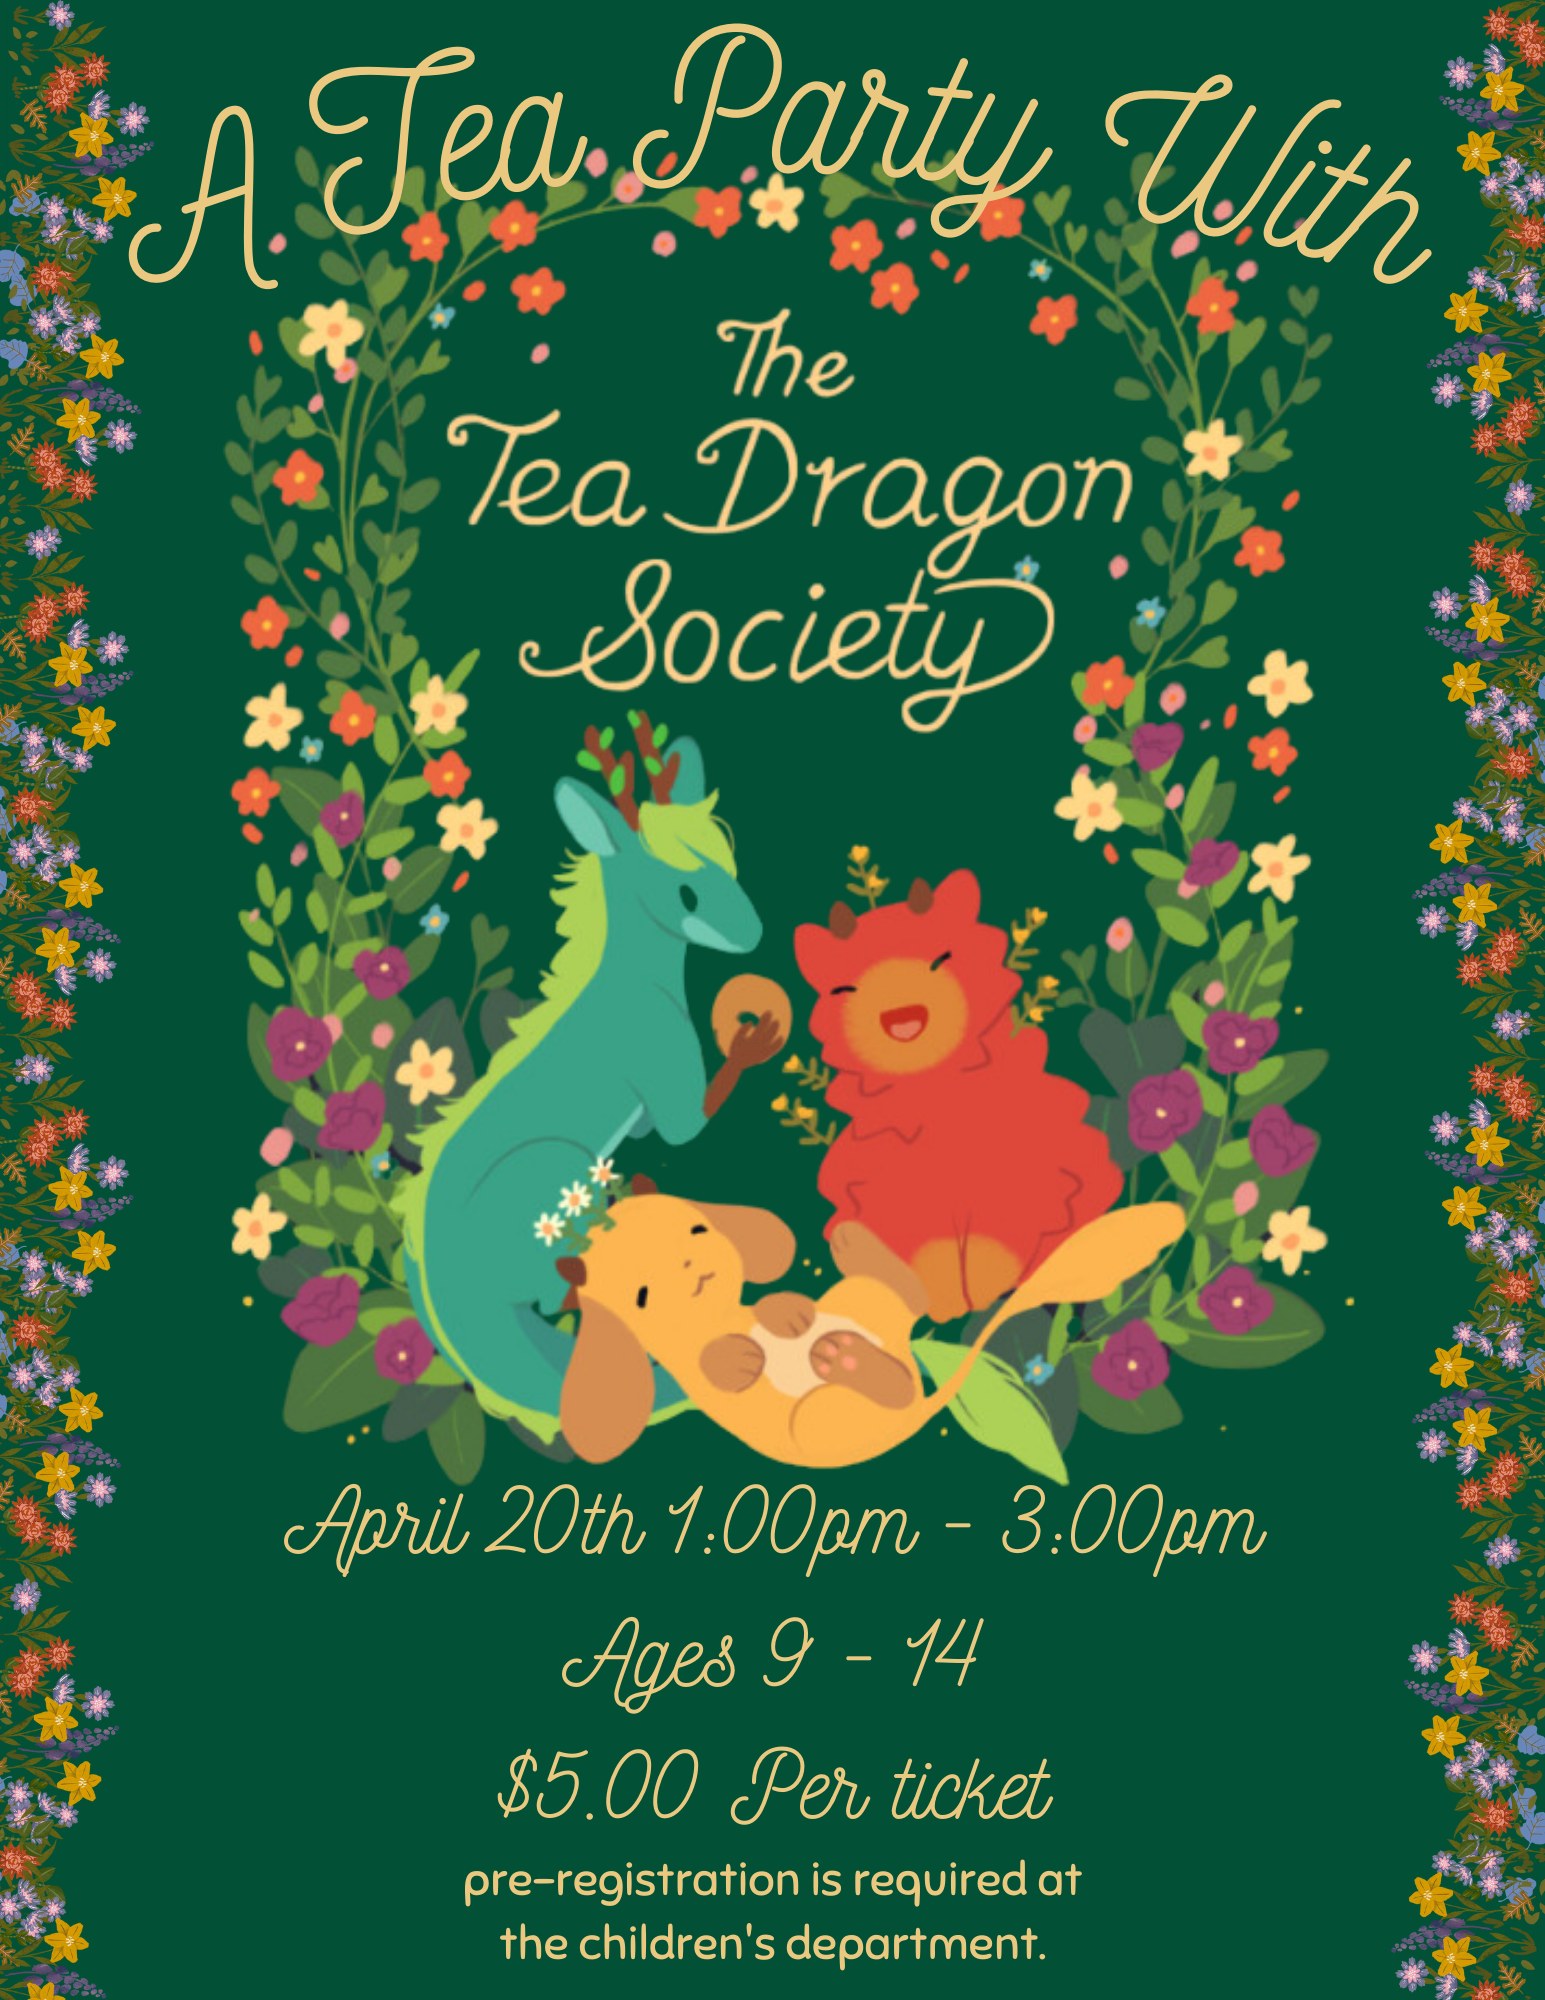 A Tea Party with: The Tea Dragon Society.  Ages 9 -14 (No exceptions) April 20th From 1:00pm - 3:00pm (Mezzanine) $5.00 per ticket, and pre-registration is required at the children's department.  Registration opens on March 13th.